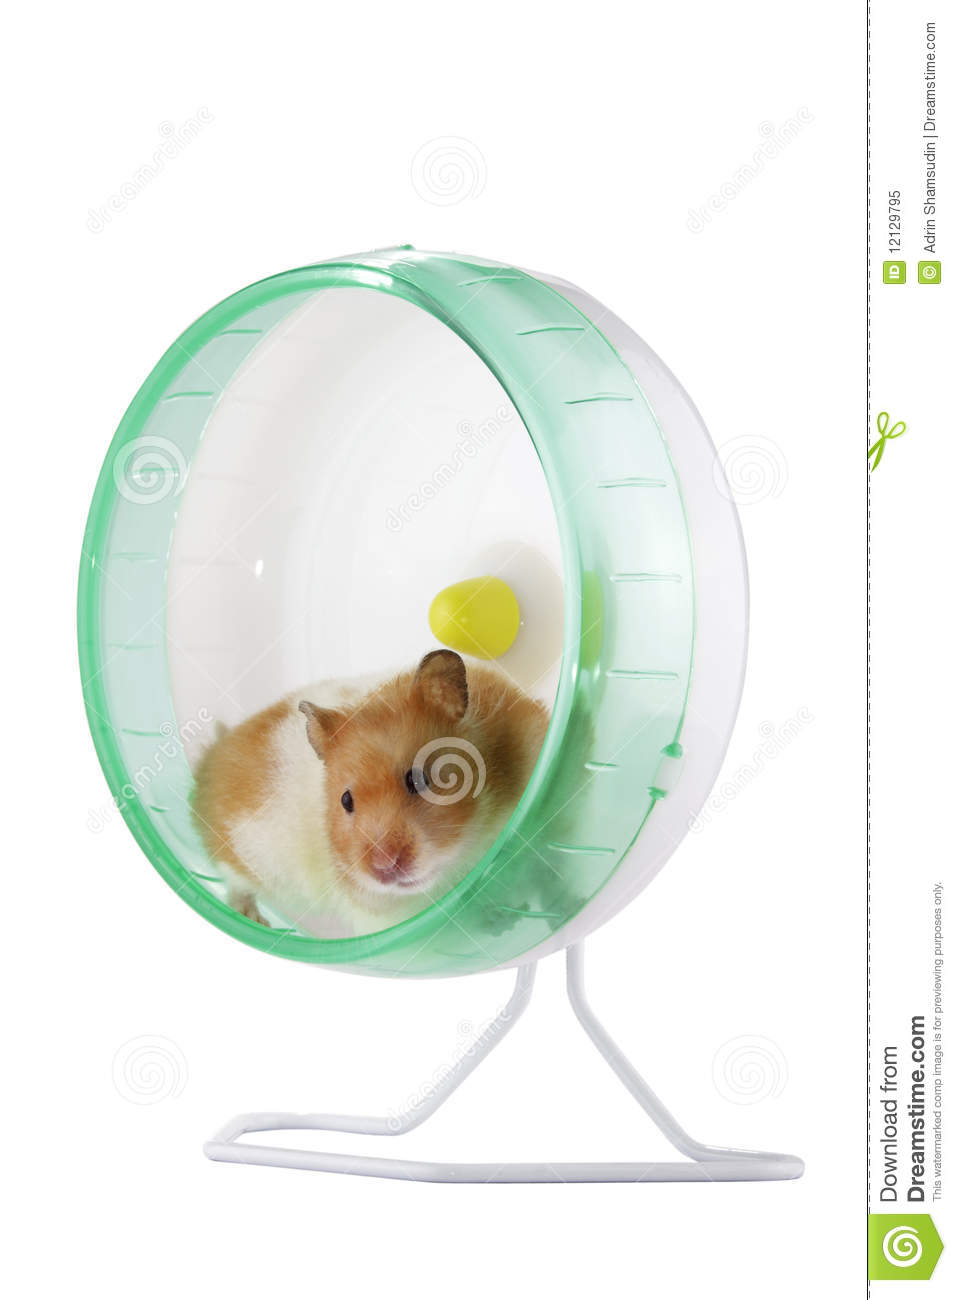 Hamster In A Wheel Royalty Free Stock Photo   Image  12129795